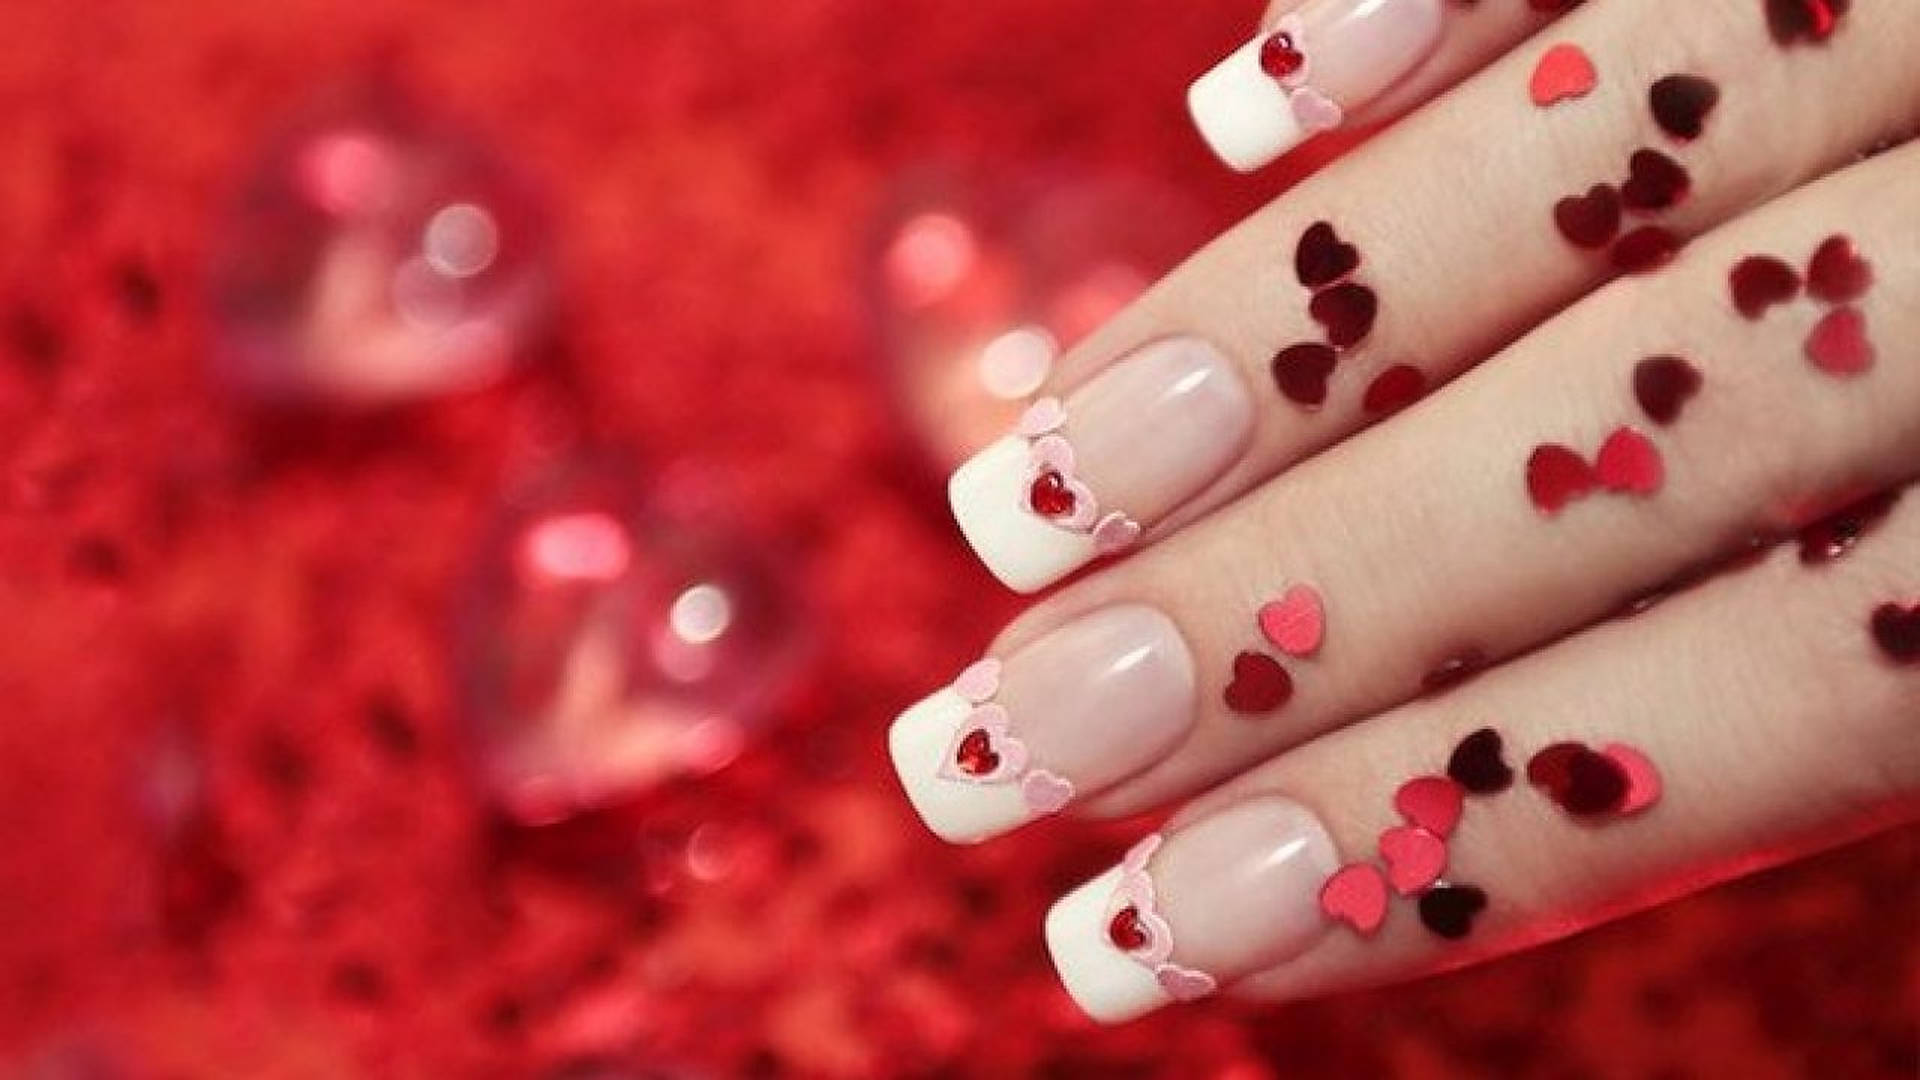 Passionate Red Heart Glittery Nails Wallpaper